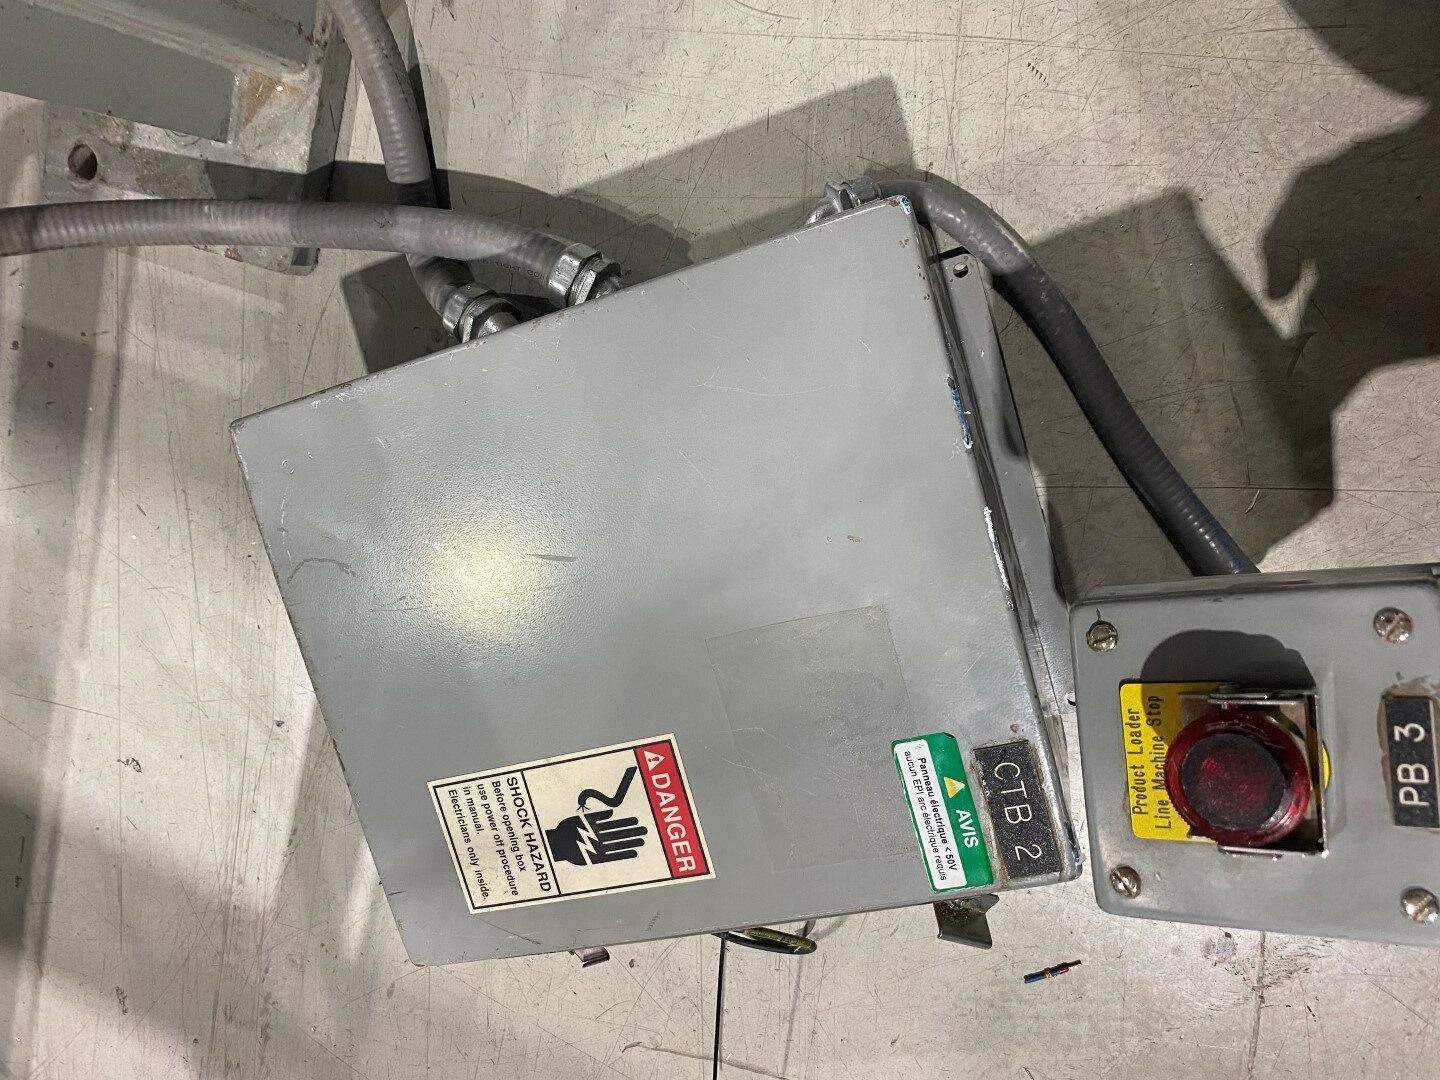 Used Roskam pick & place station with ABB IRB340 4 axis robot